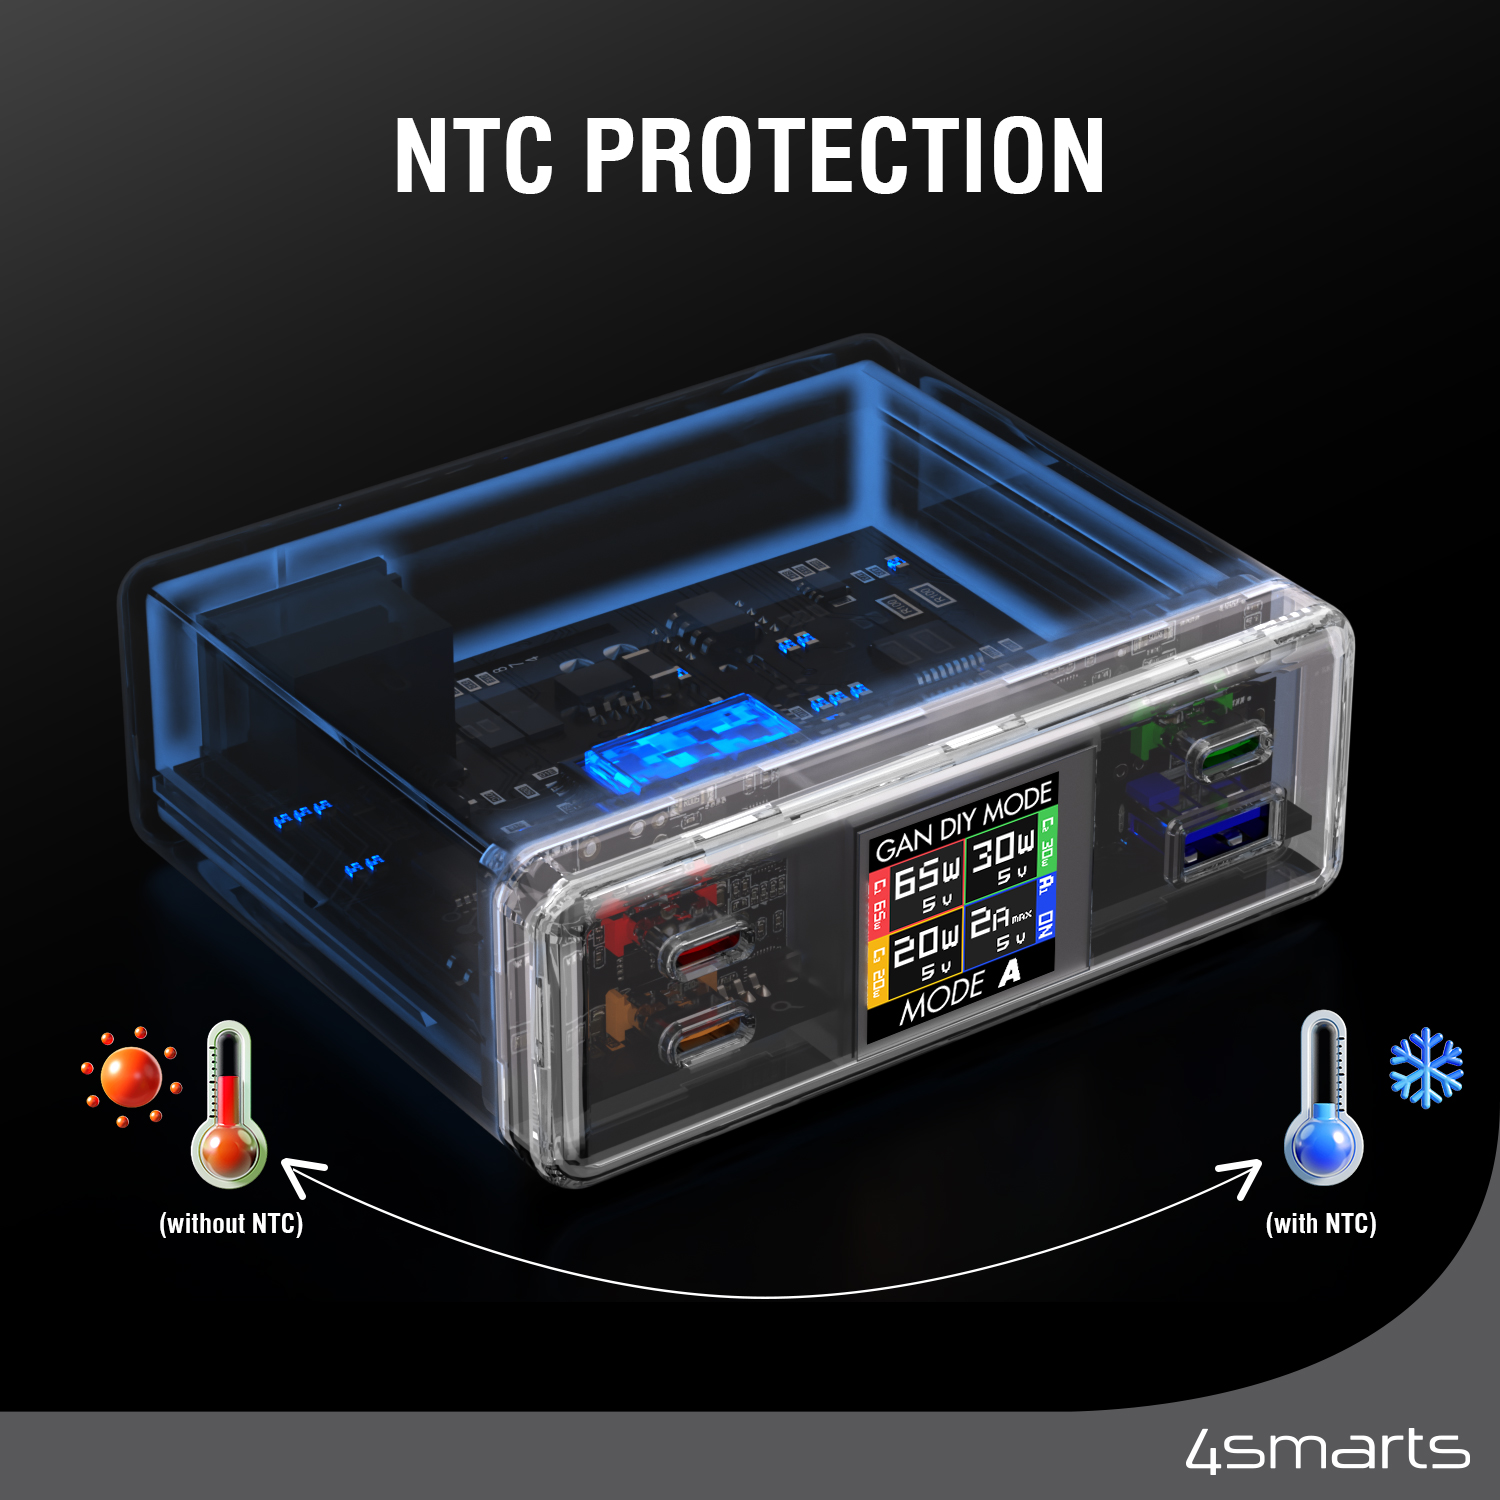 The 4smart GaN DIY MODE is a multiport USB charger equipped with NTC protection.